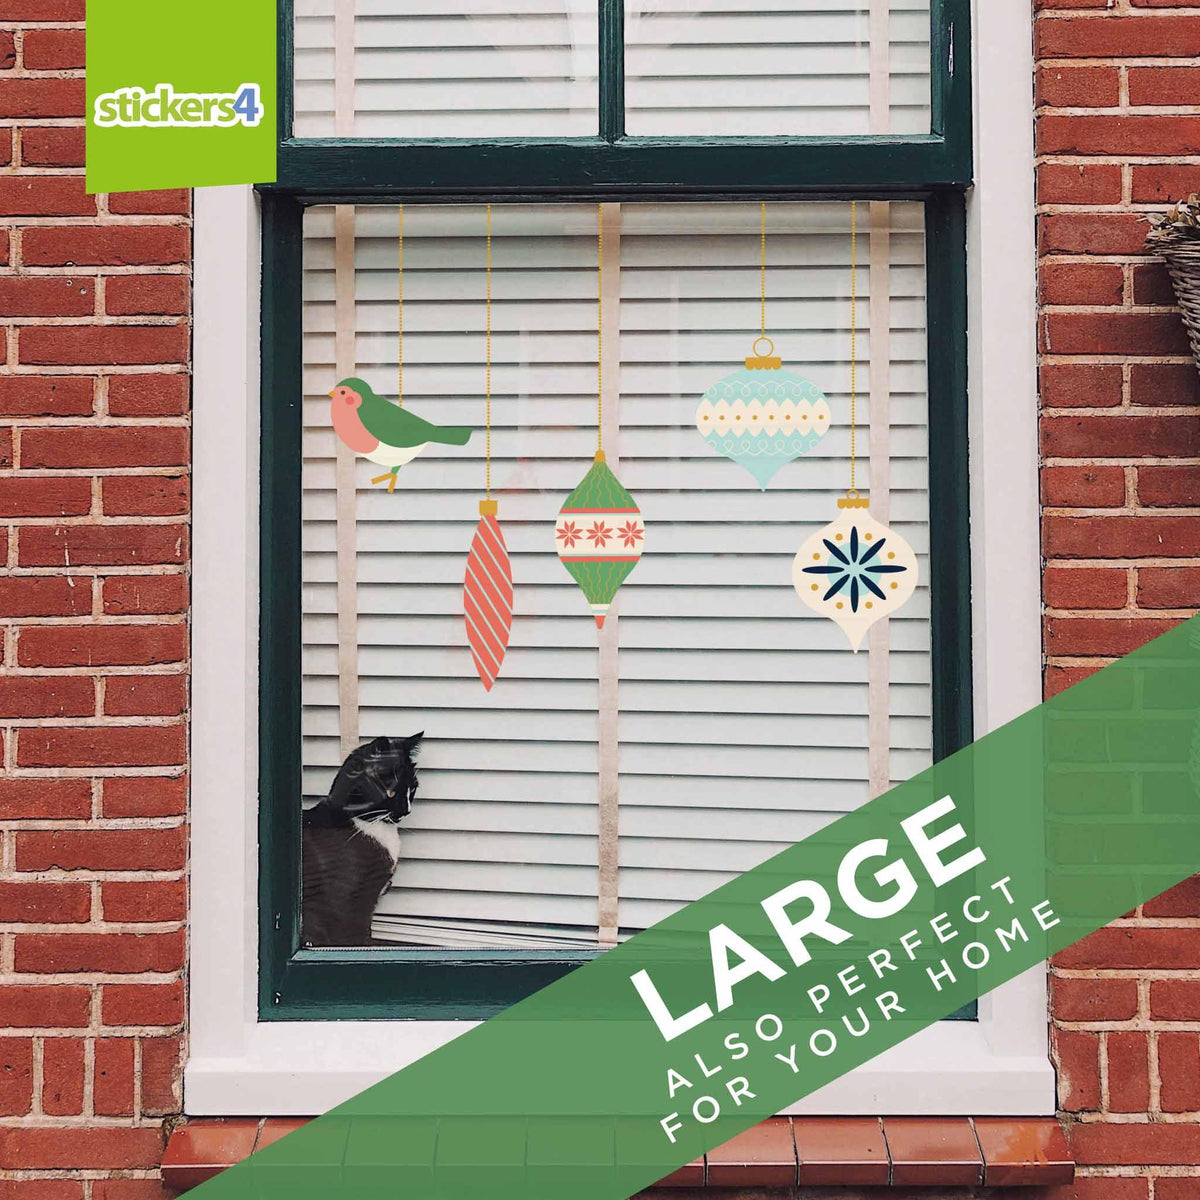 10x Green Vintage Style Decorations with Strings - Christmas Window Clings